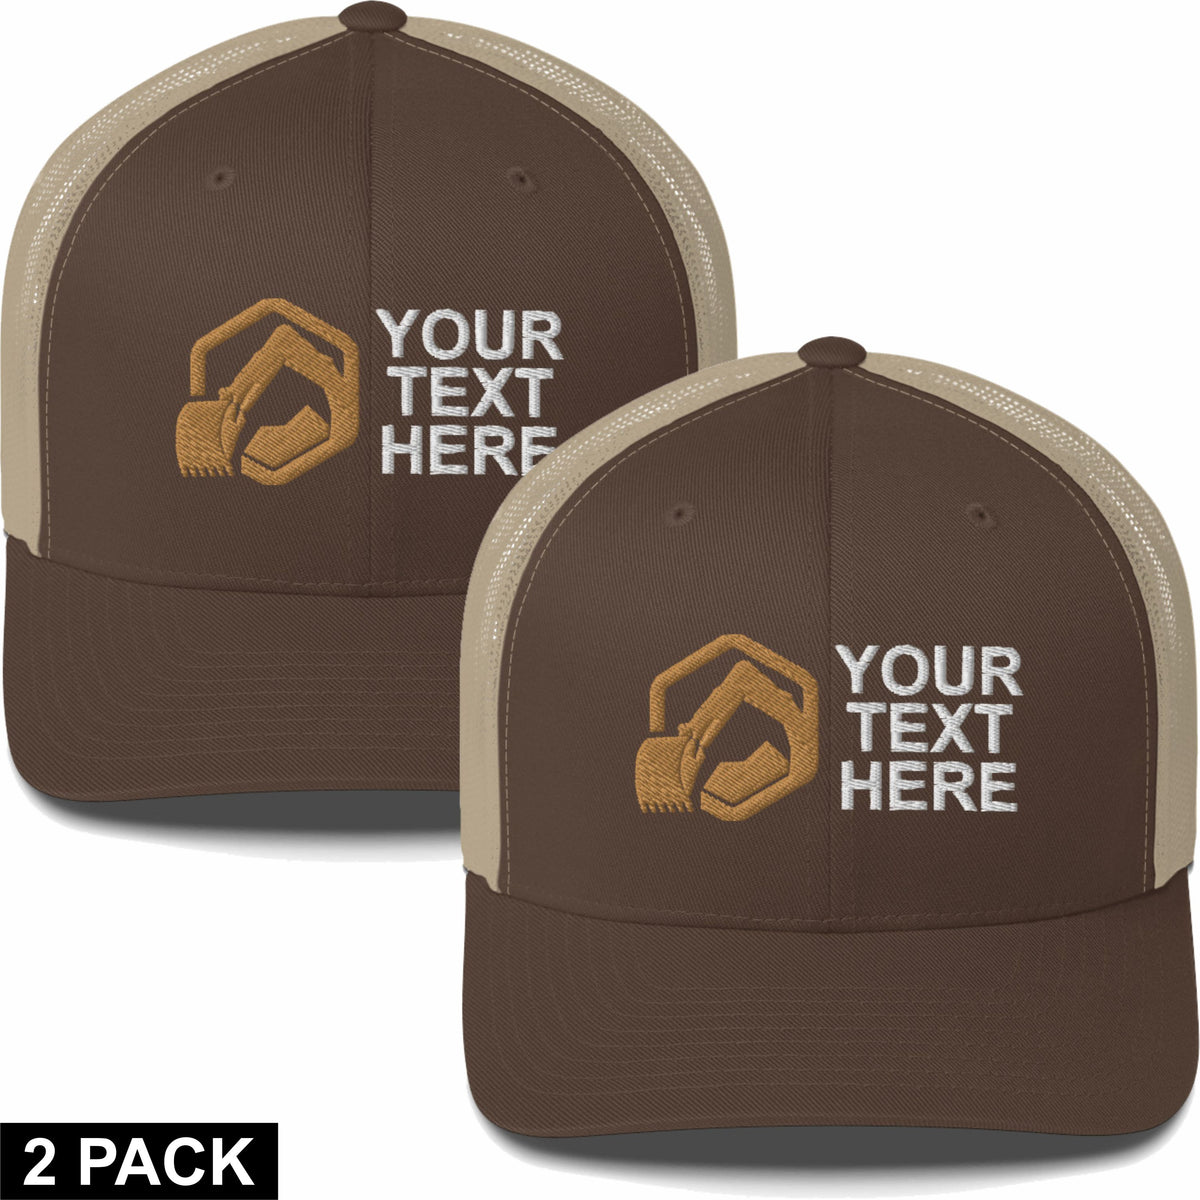 2 Embroidered Hats - Excavator Bucket Rock - Your Text Here - Free Shipping